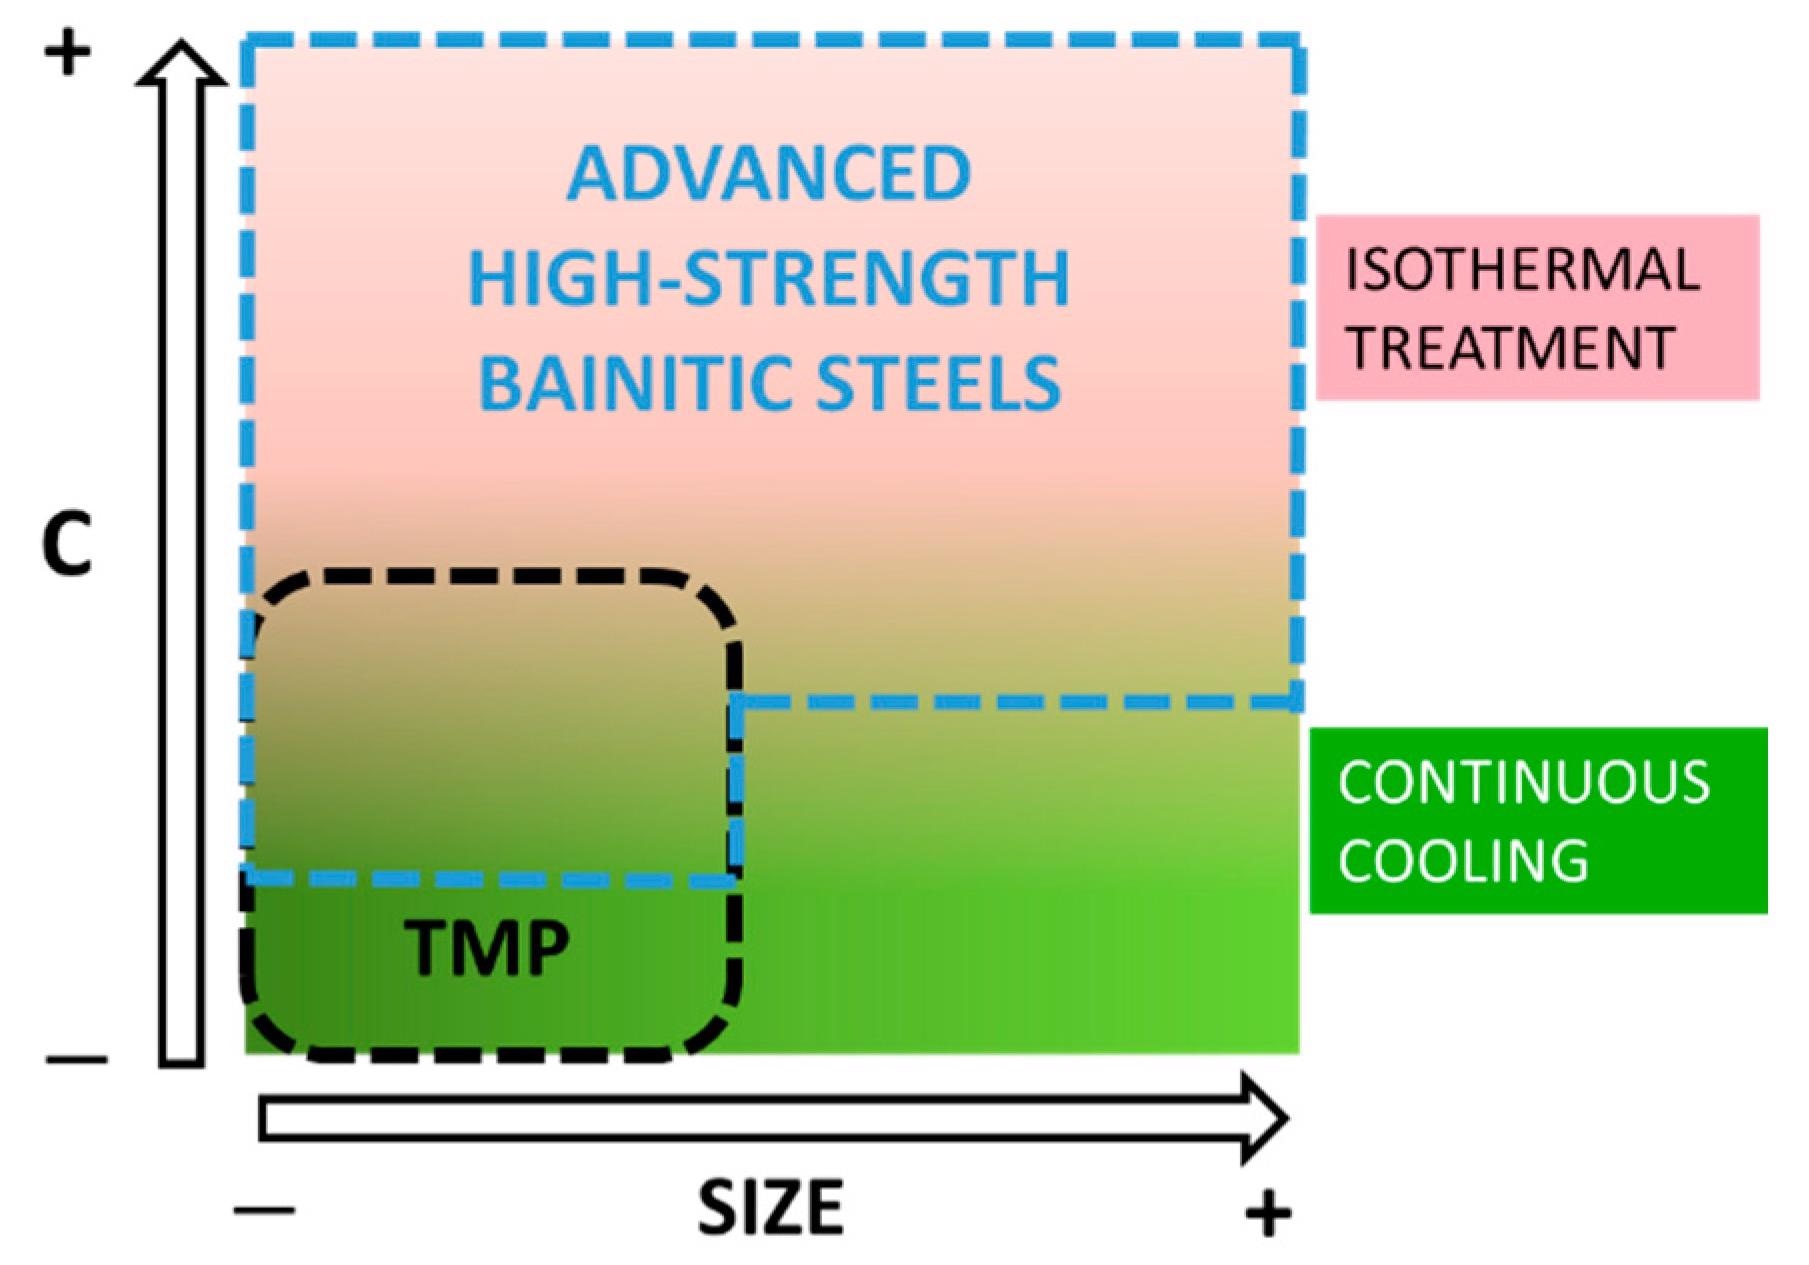 Figure 3 Schematic illustration of advanced high-strength bainitic steels (within the dashed blue line) vs. C content and size of the cross-section of the part.